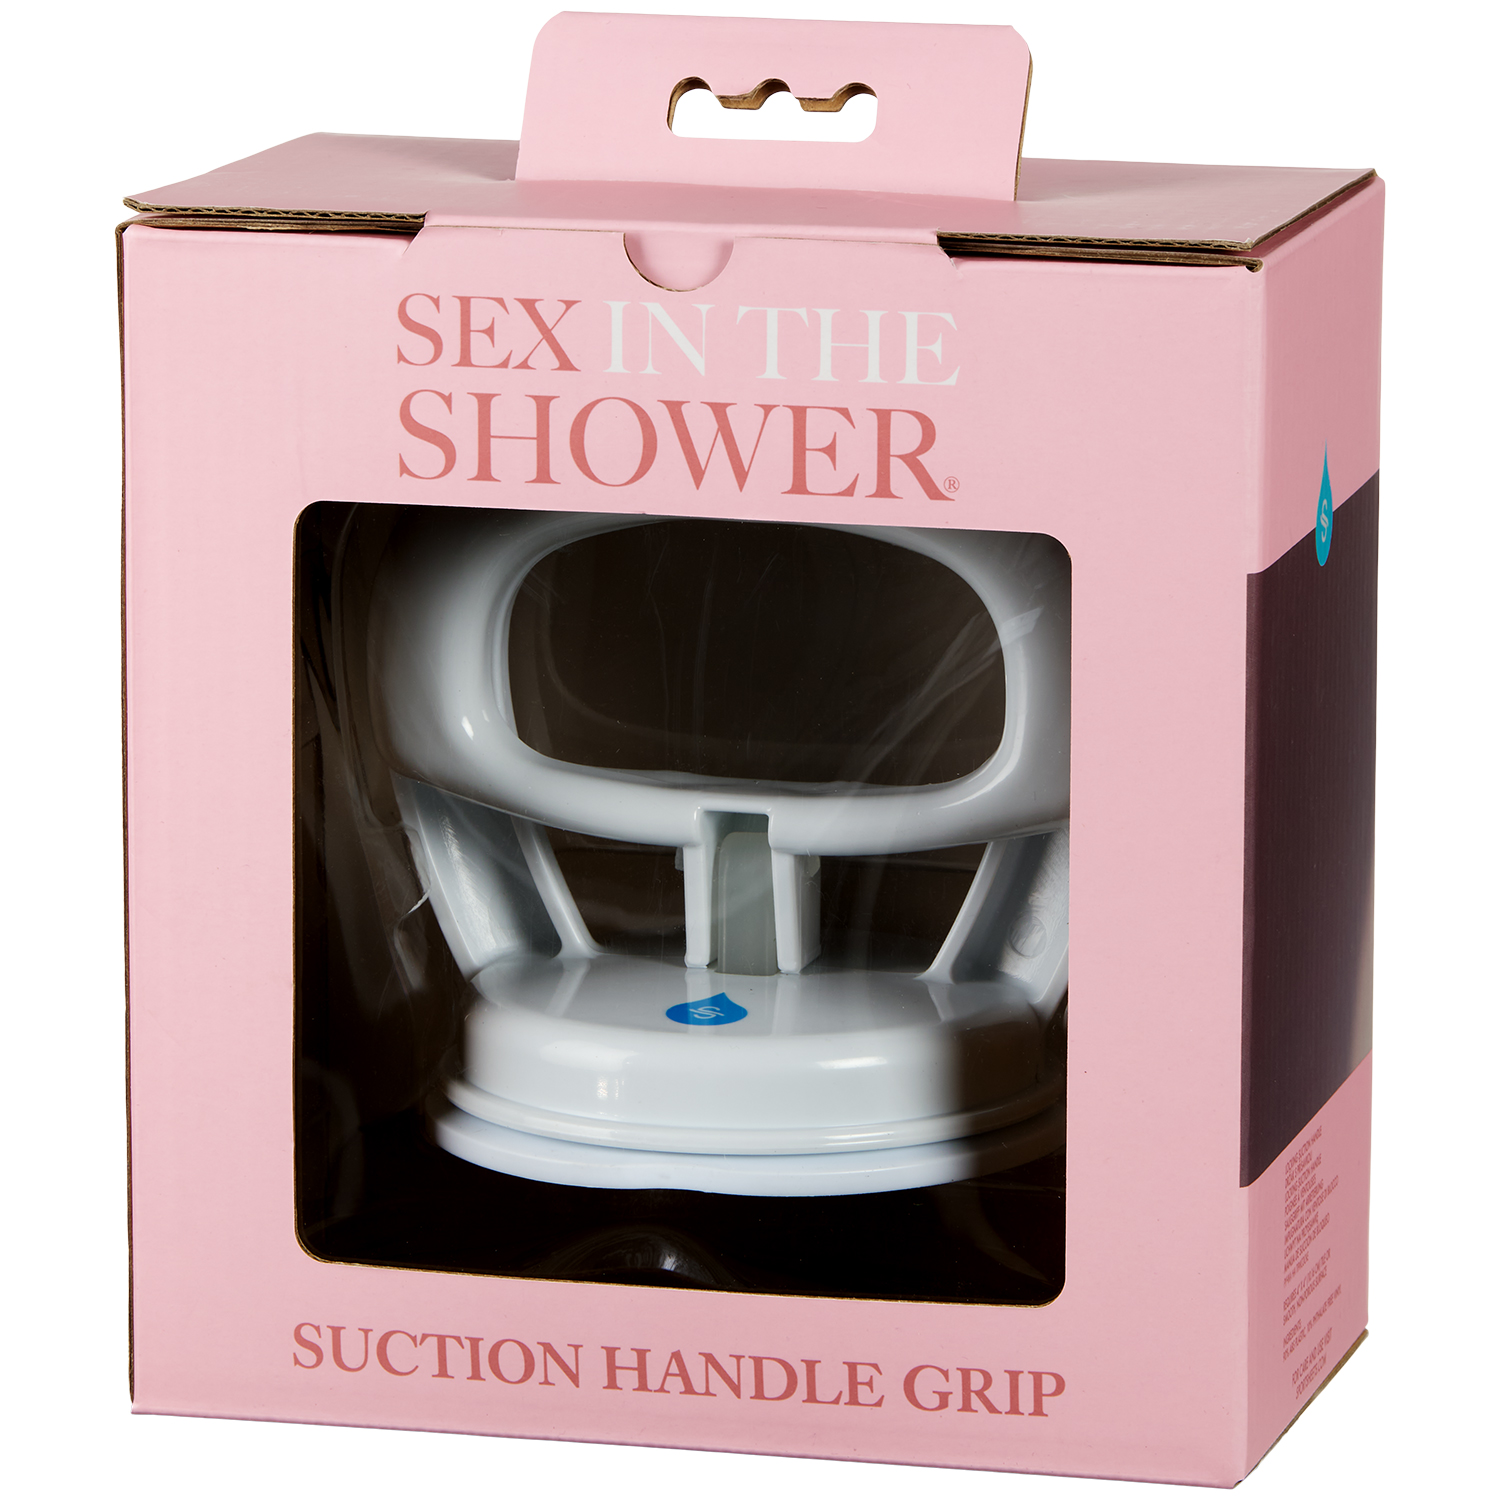 andrew crome recommends sex in the shower suction pic